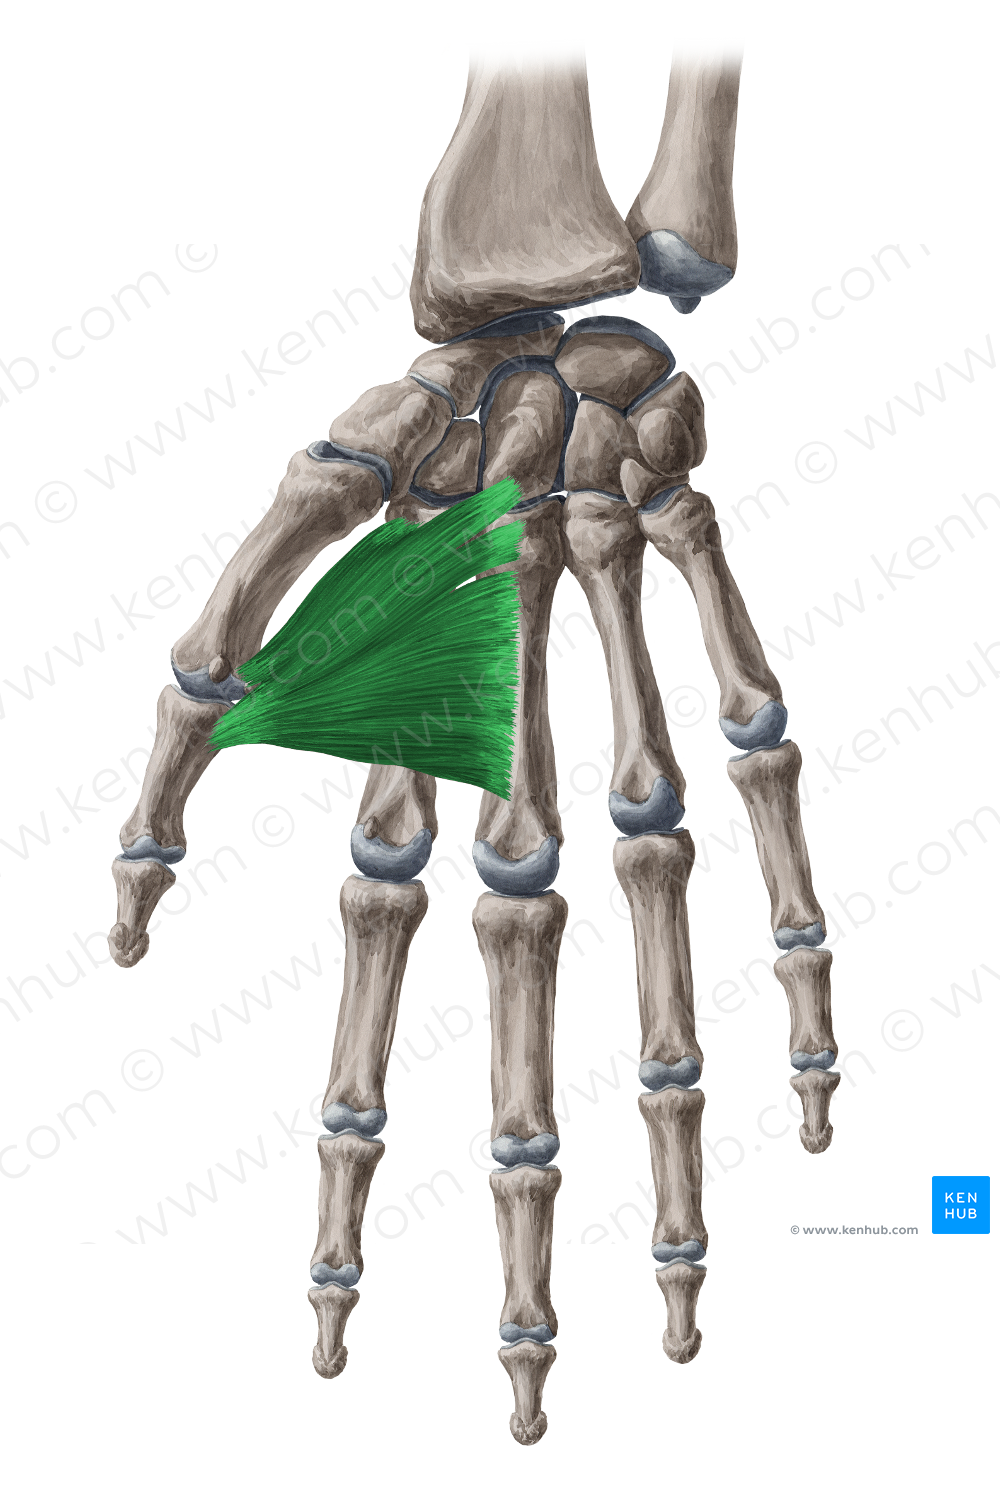 Adductor pollicis muscle (#5198)